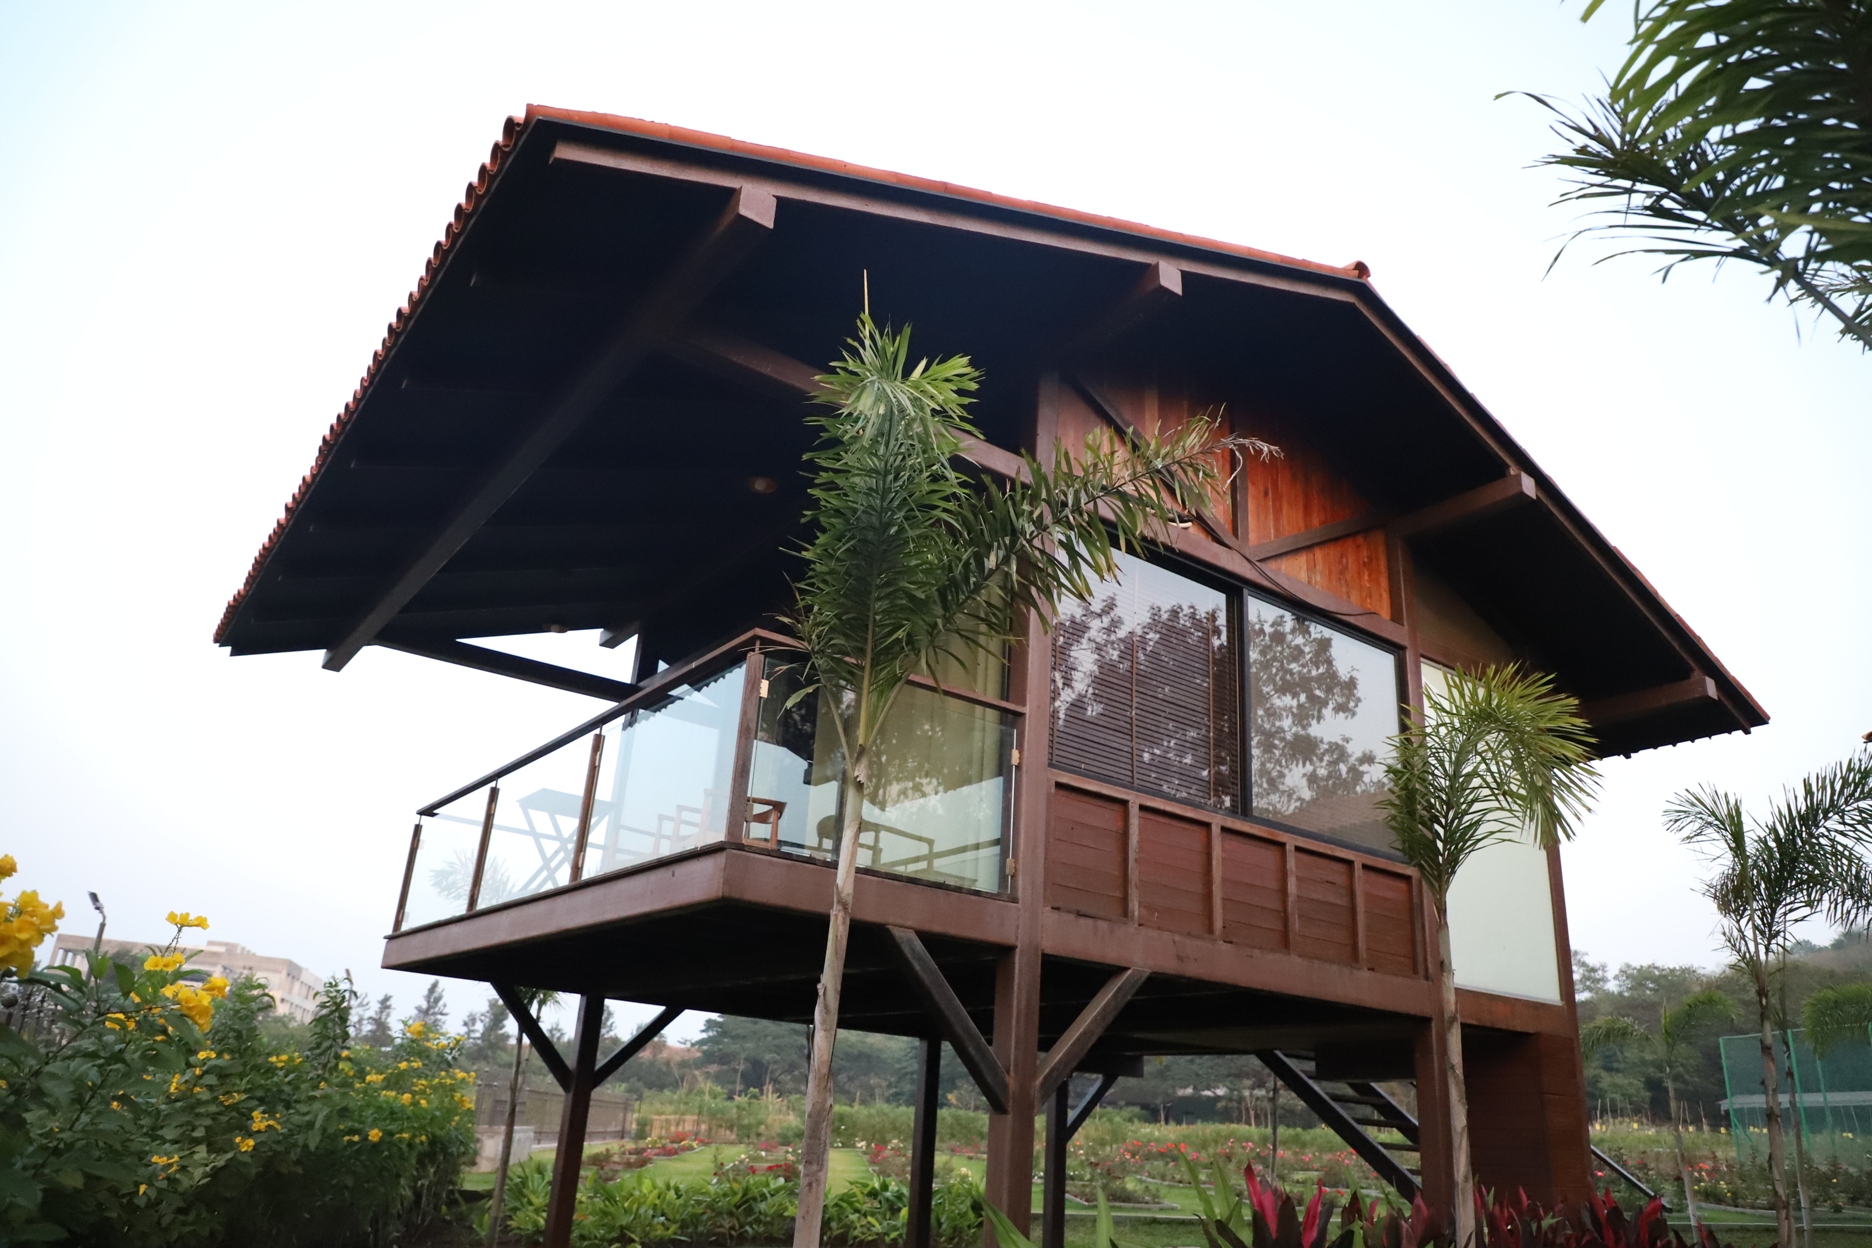 The Souce - Sula Vineyards